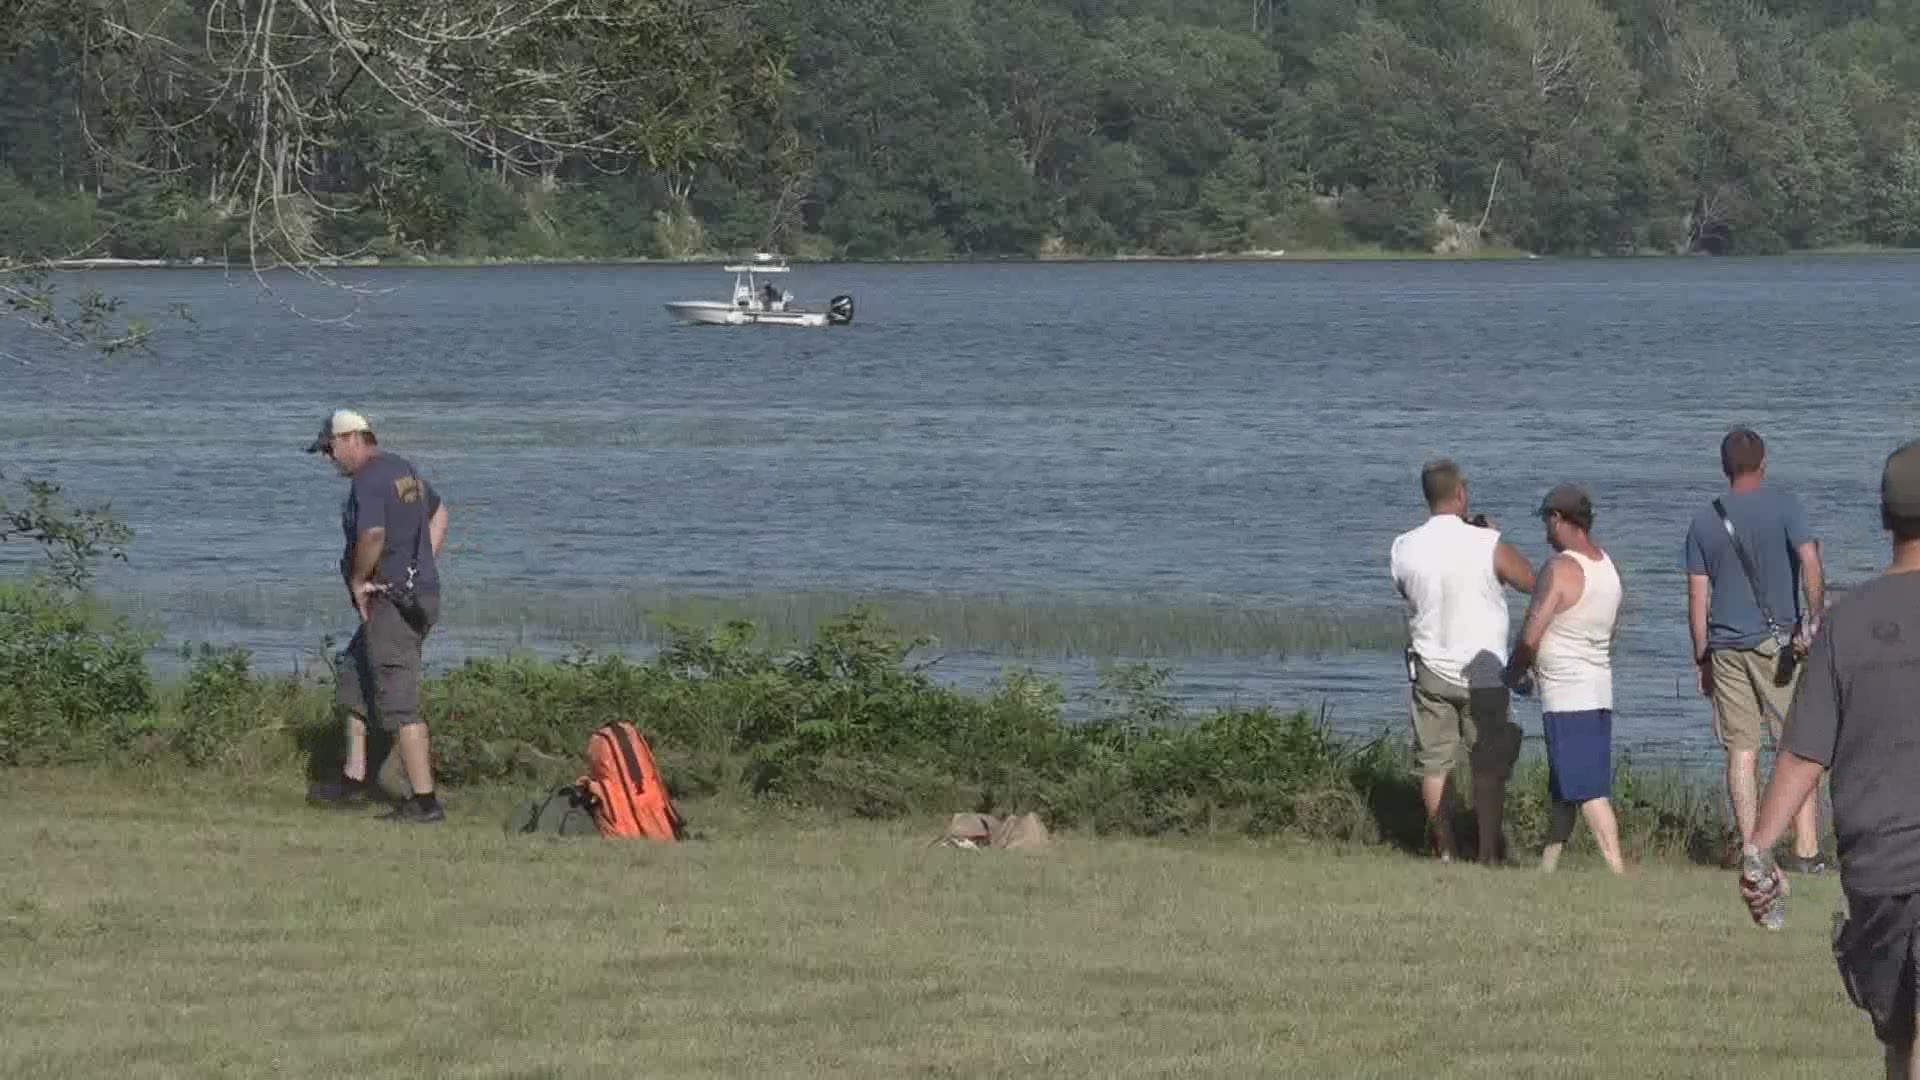 A man and woman went swimming off the back of their boat and officials say the man went underwater and never emerged.